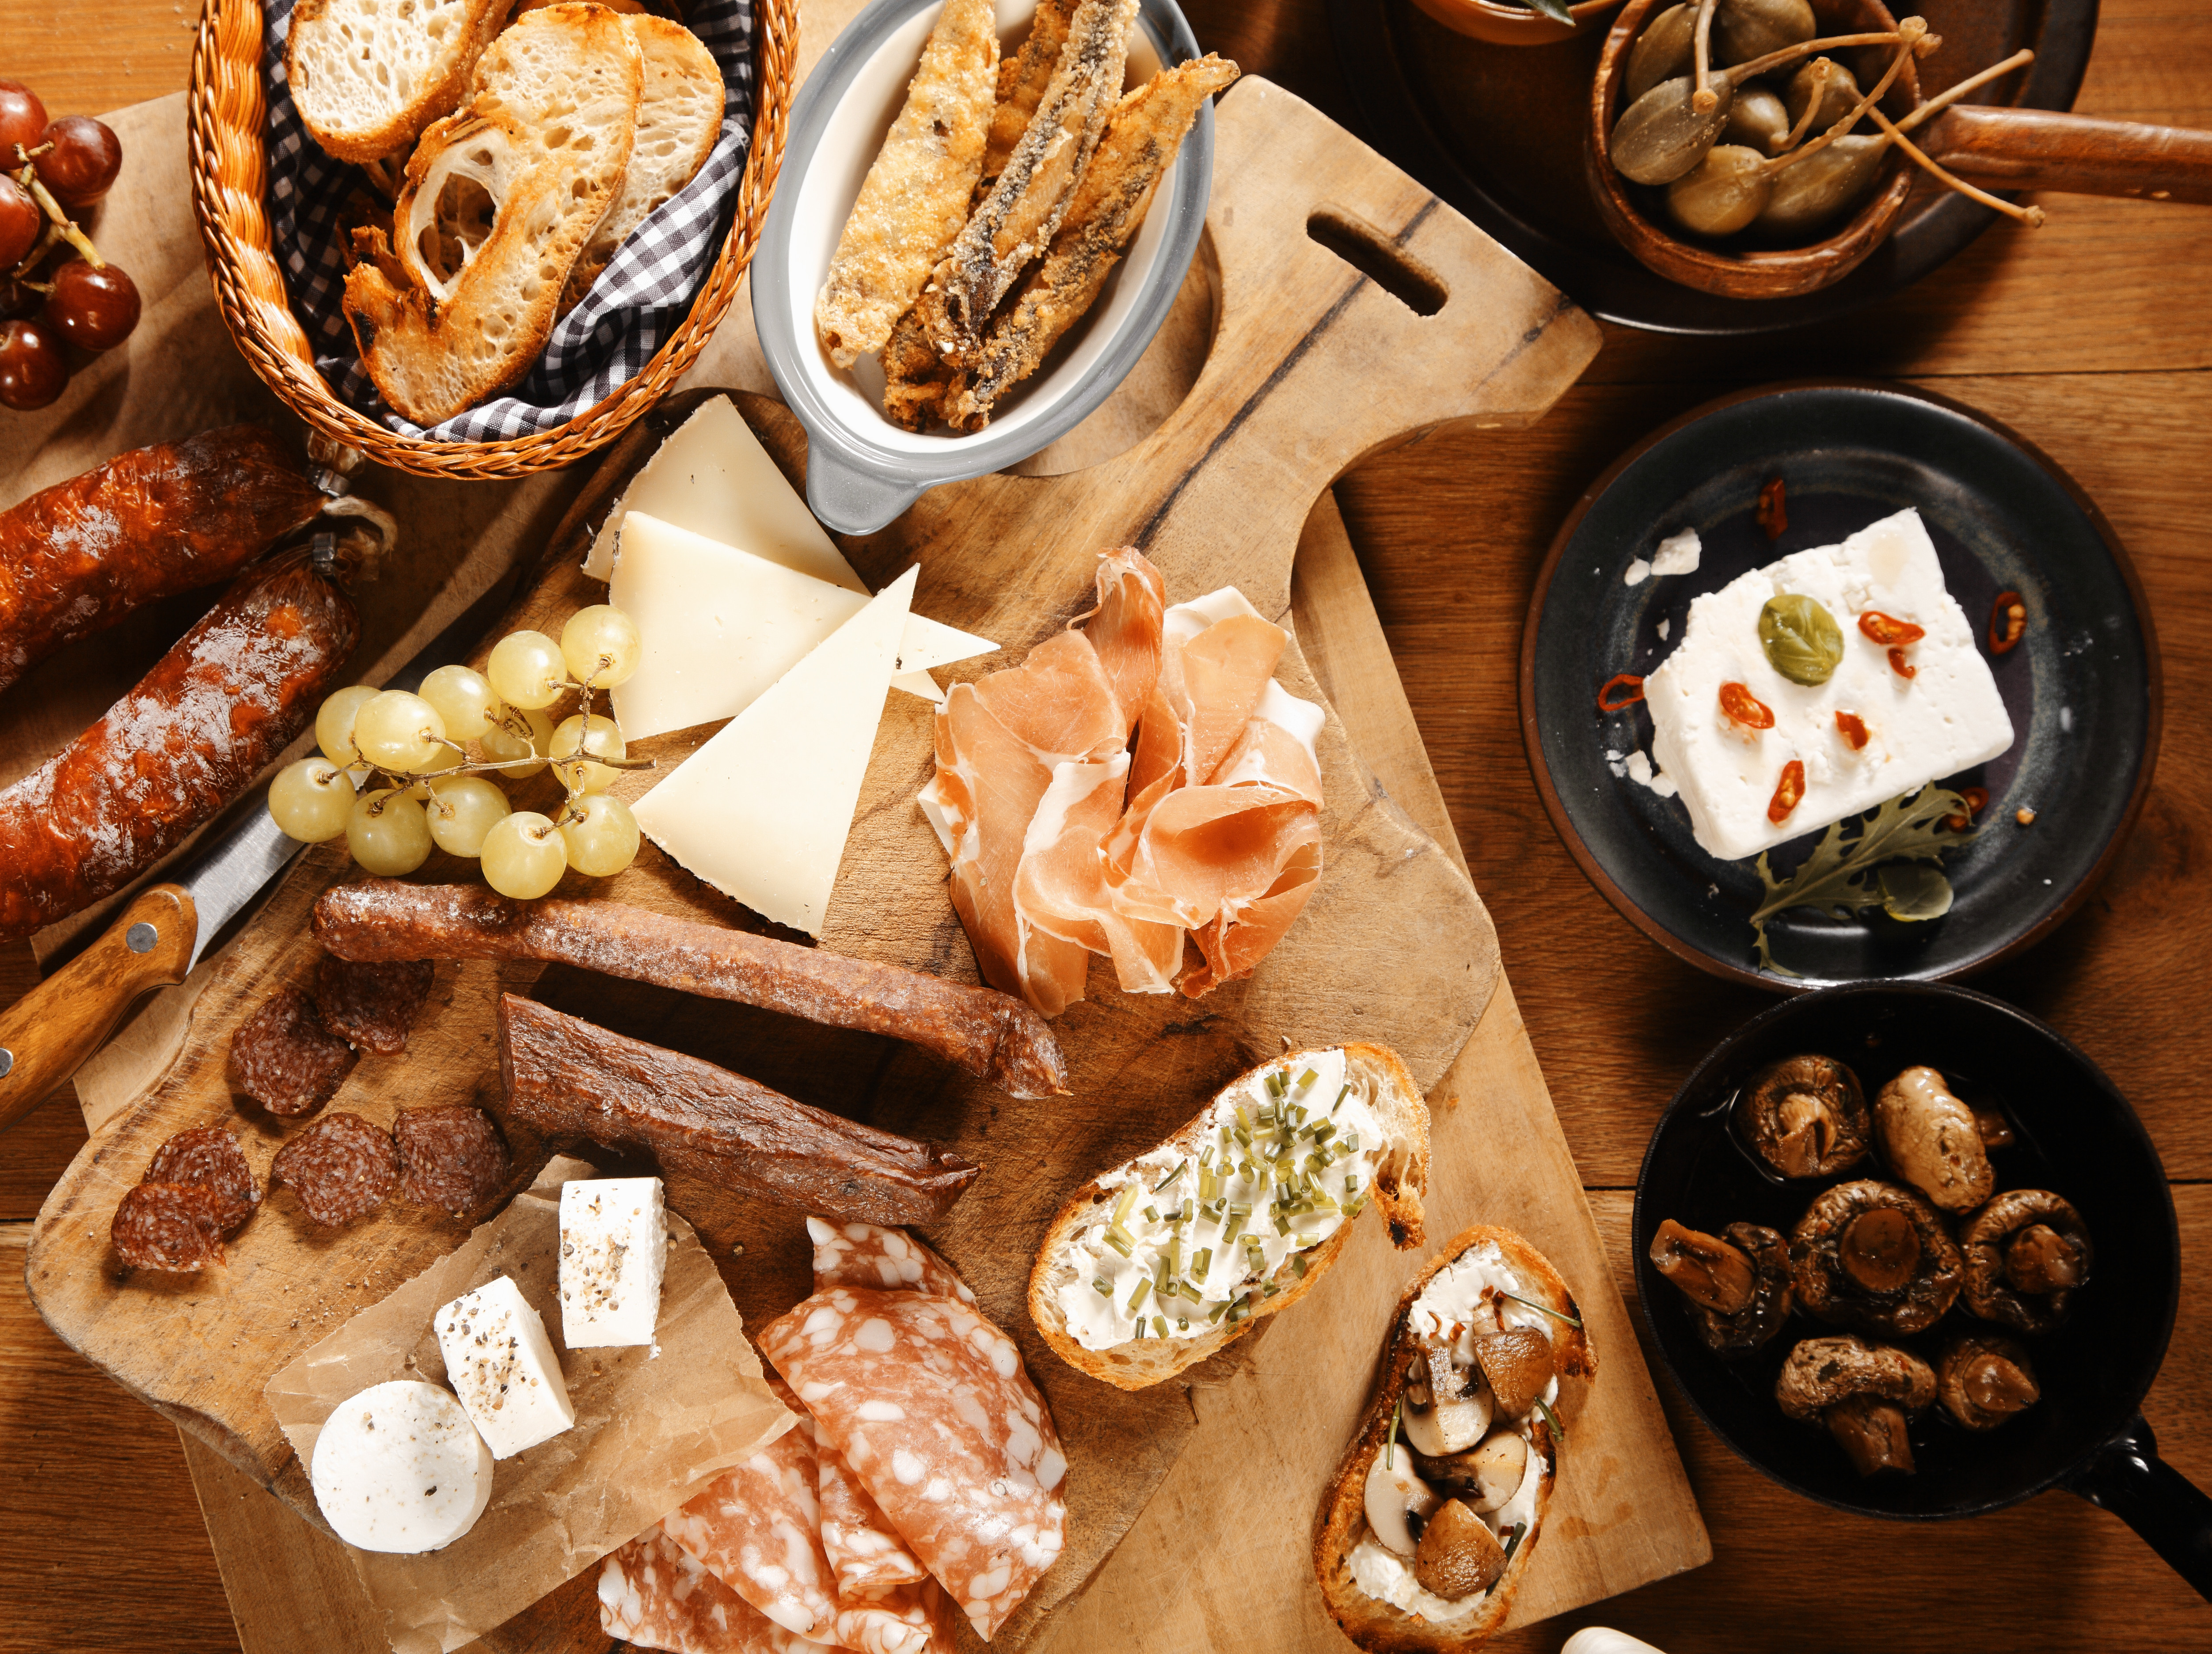 Close up High Angle Shot of Assorted Mouth Watering Tapas on Wooden Table, Emphasizing Meats, Cheese and Breads